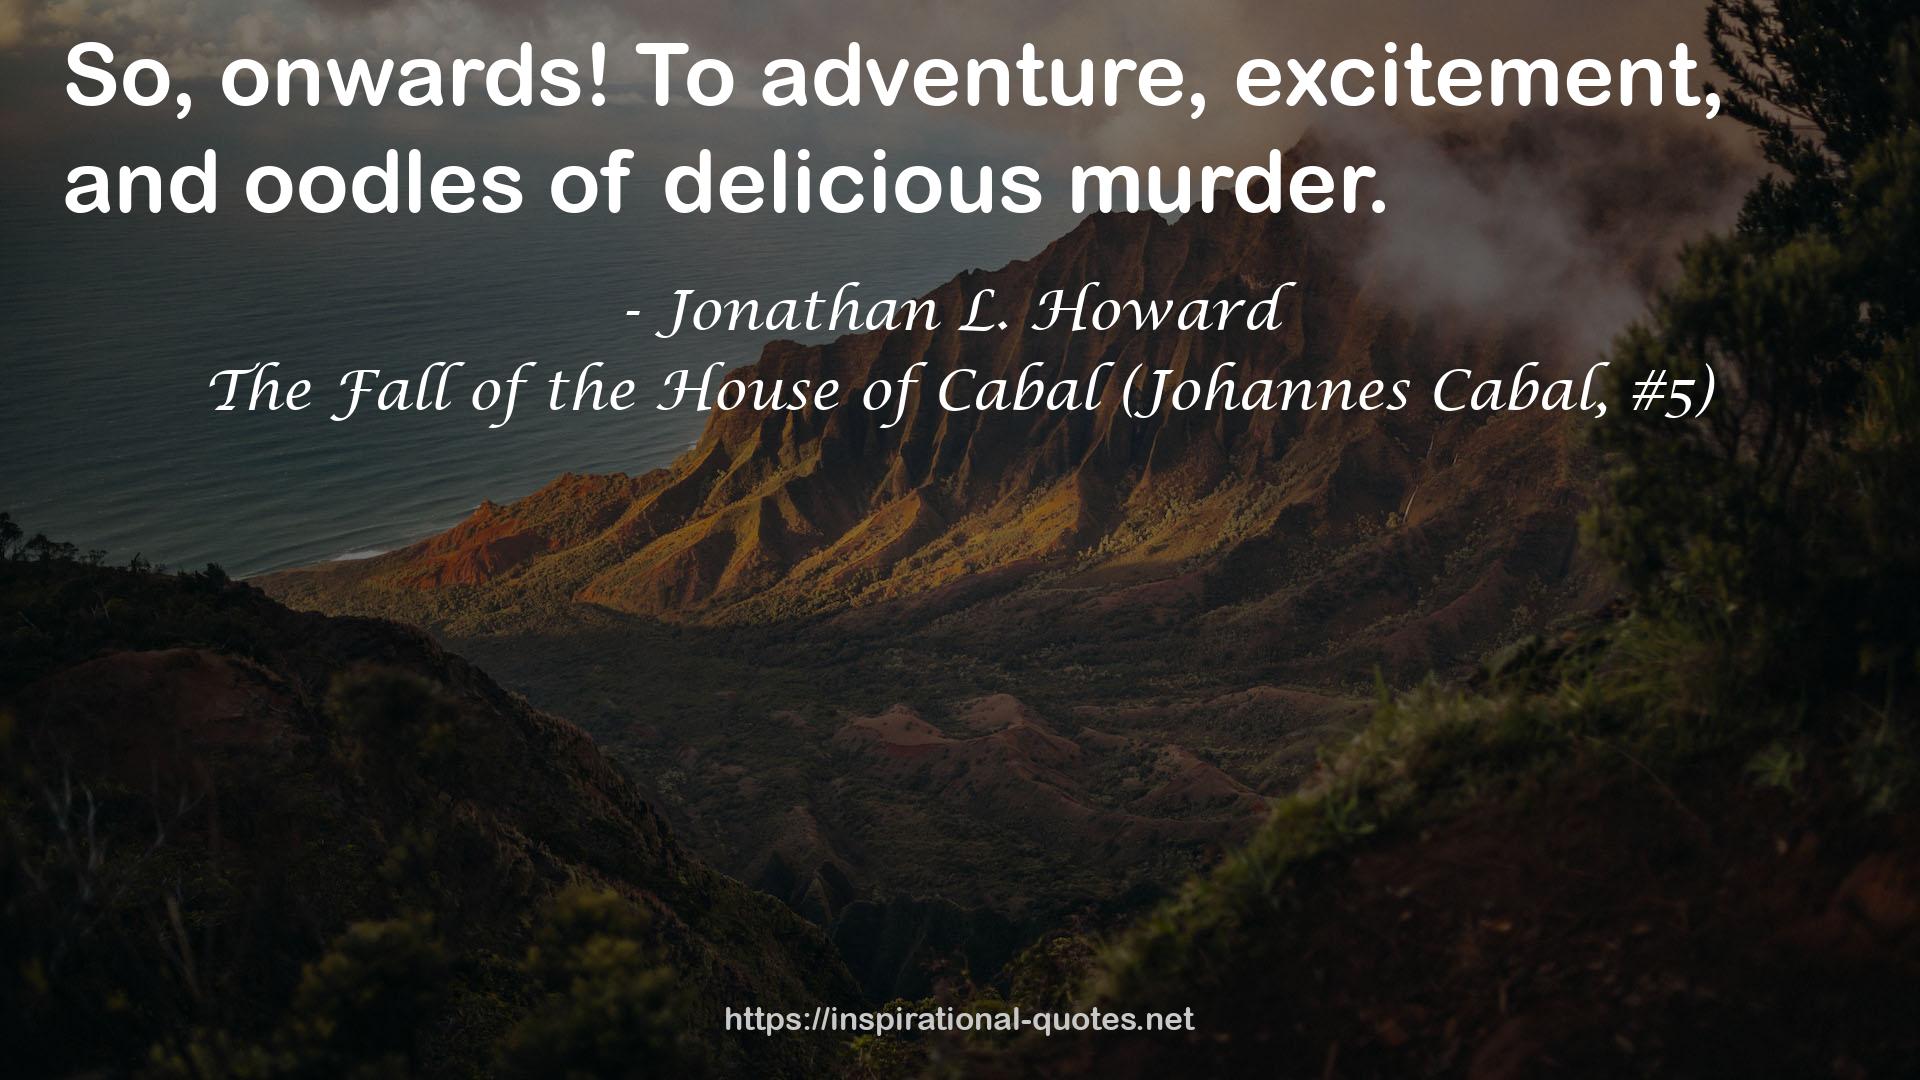 The Fall of the House of Cabal (Johannes Cabal, #5) QUOTES